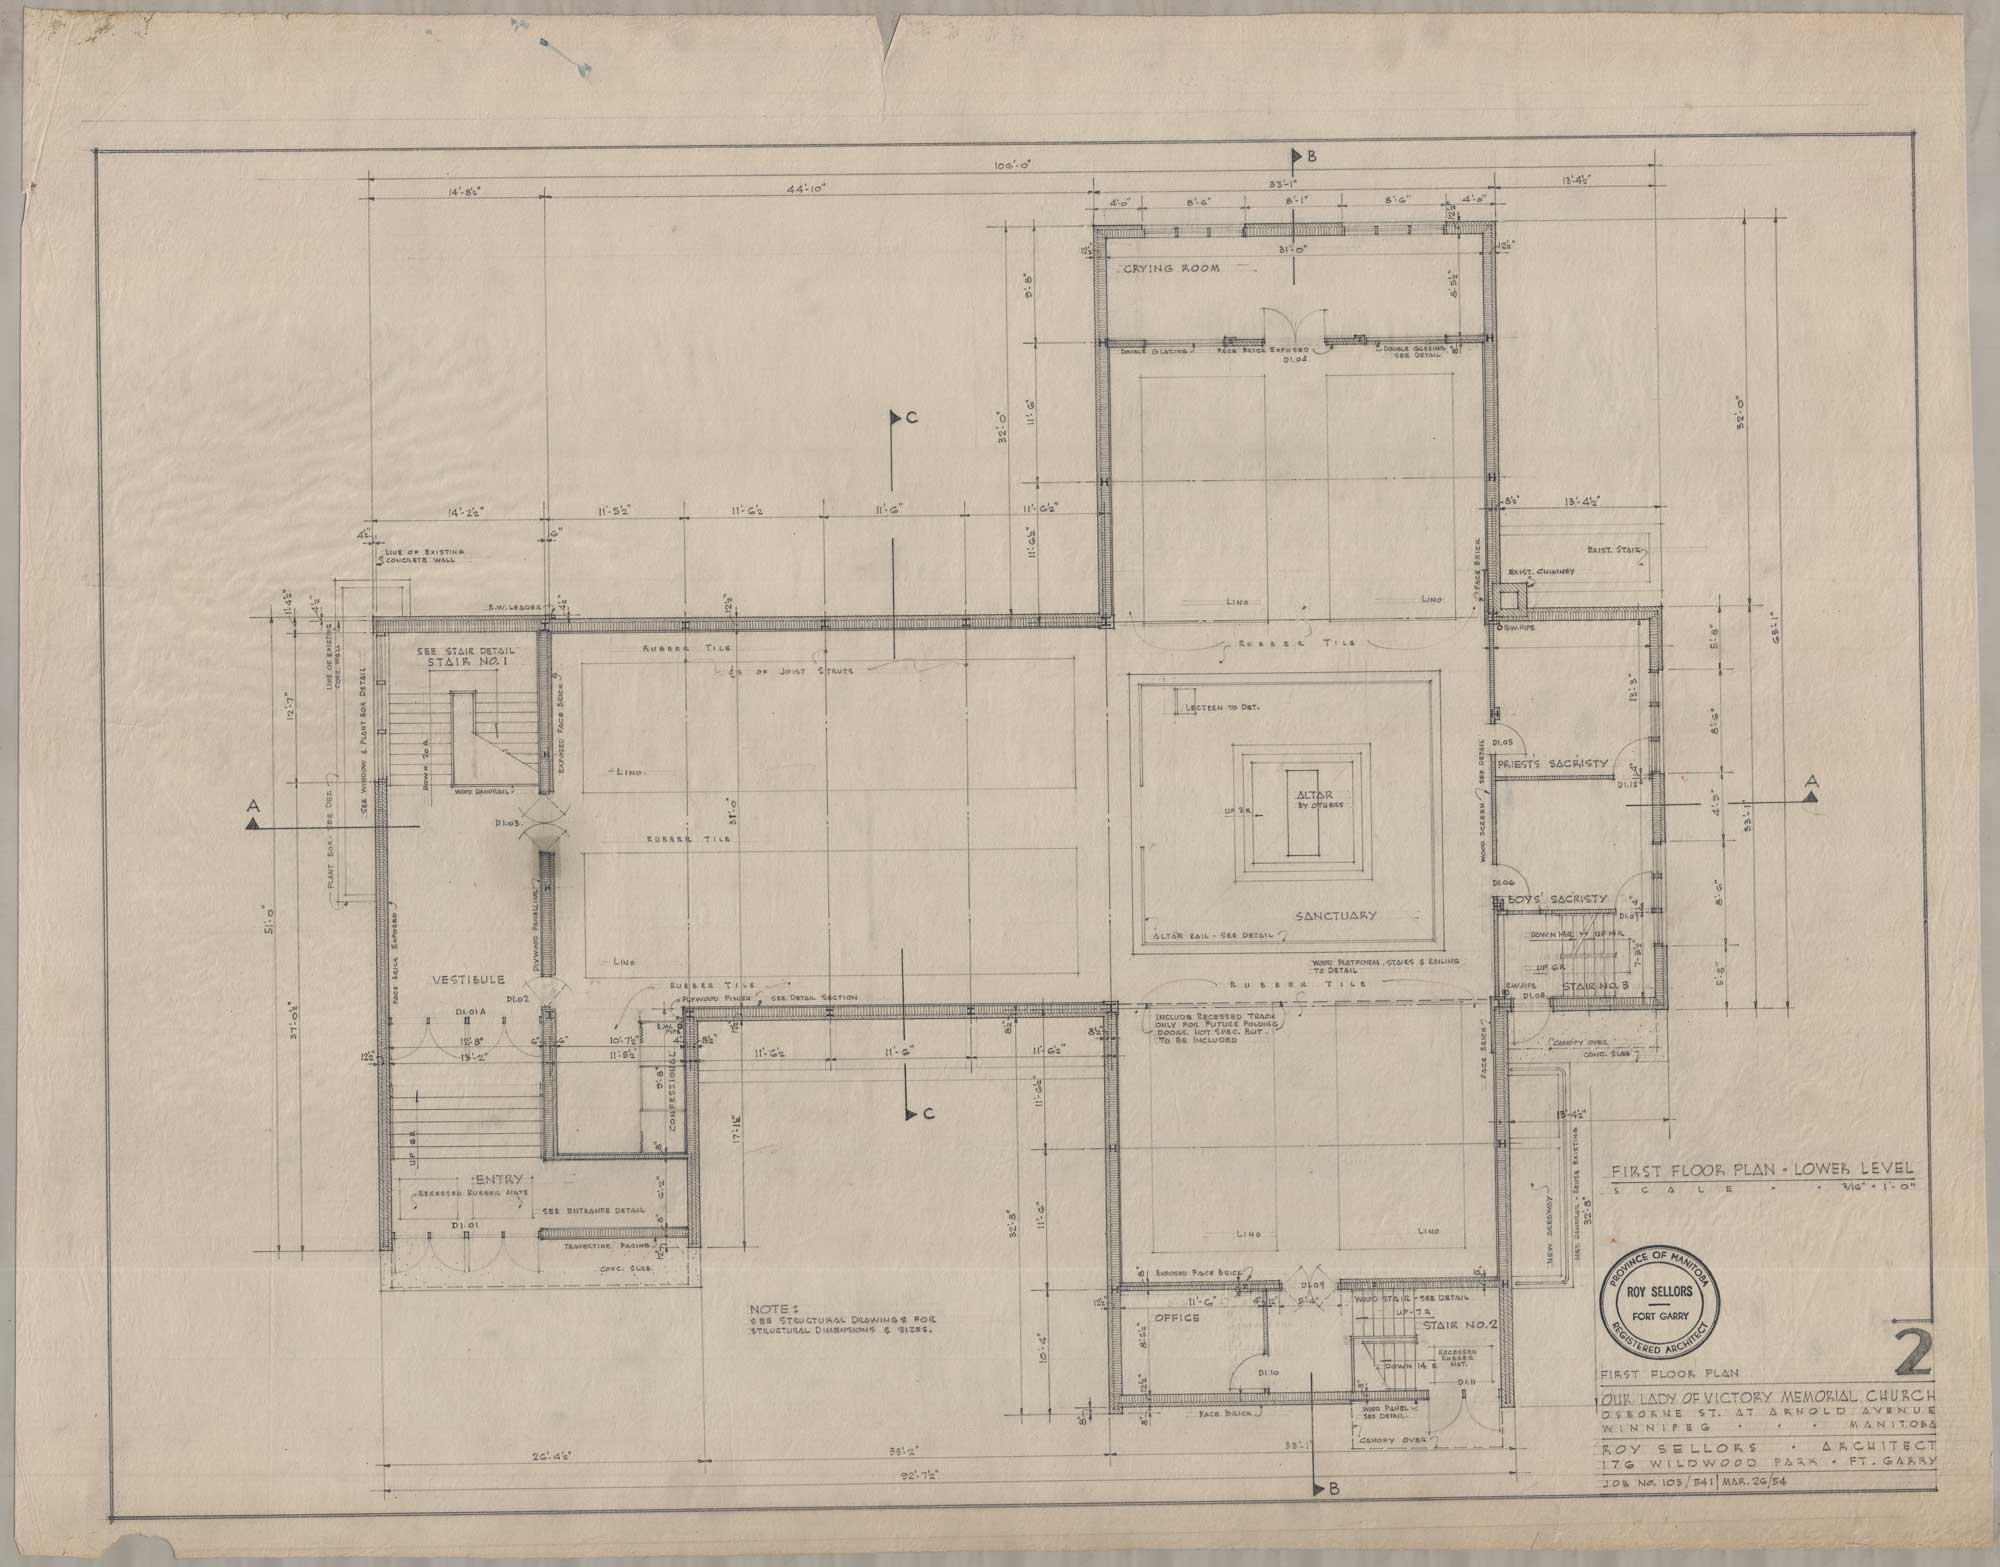 The image shows a drawing of the main floorplan for Our Lady of Victory Church.